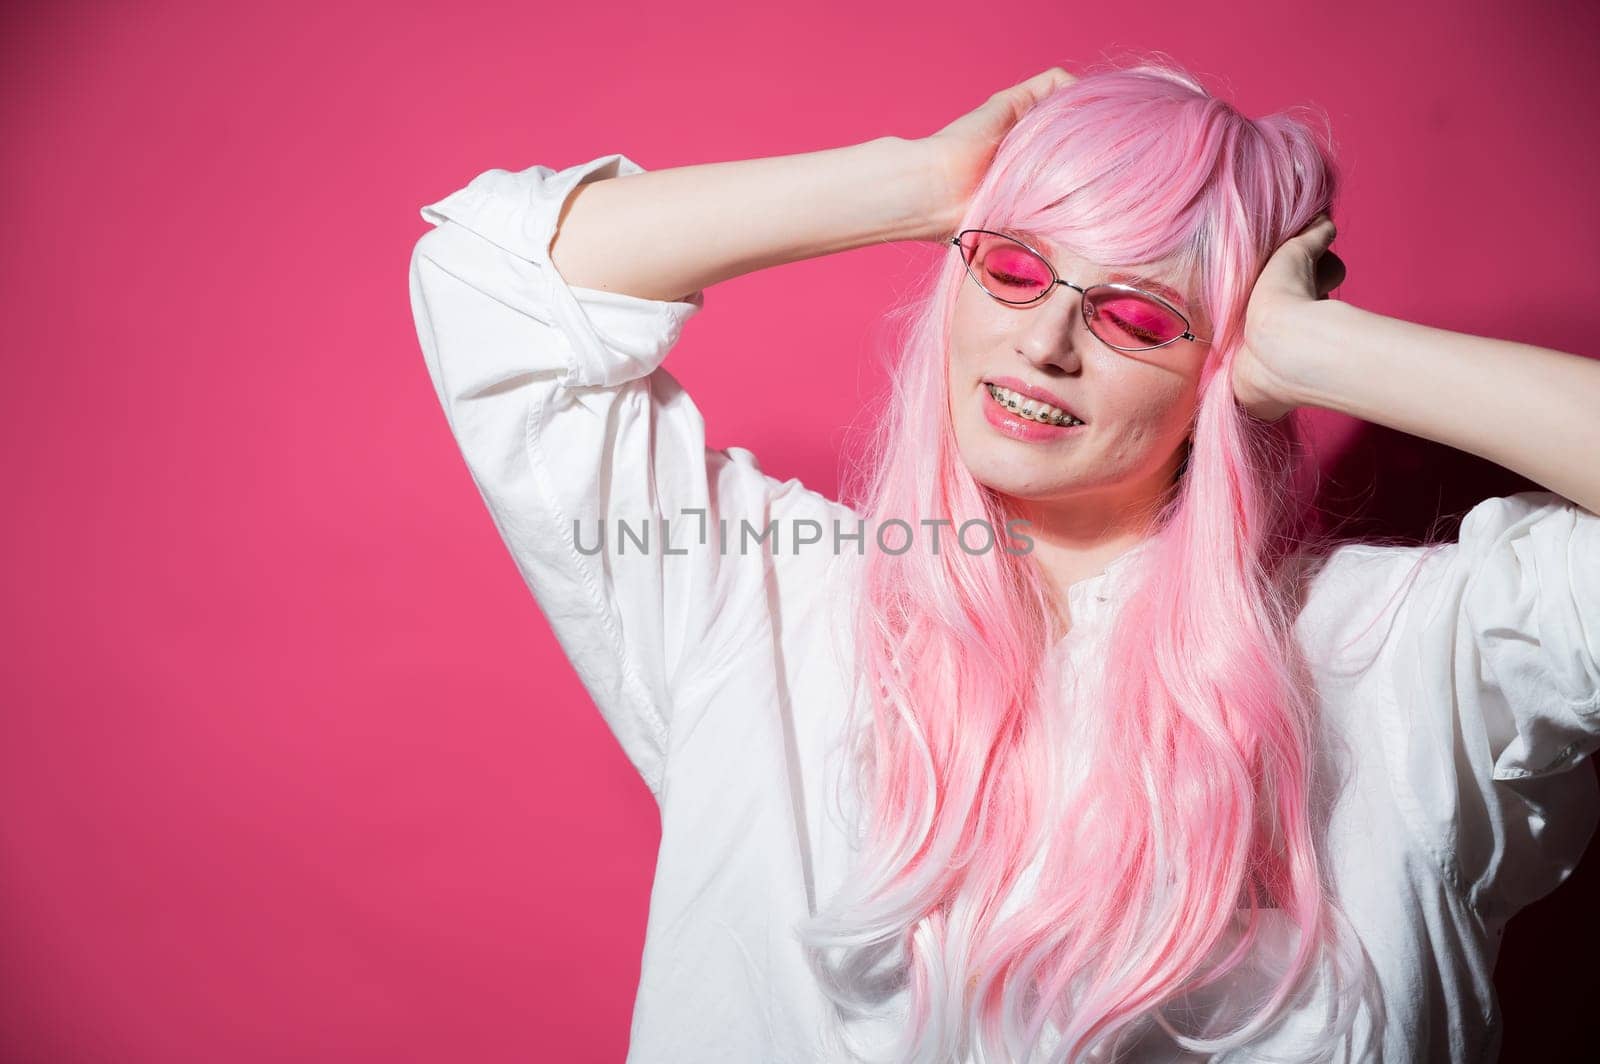 Close-up portrait of a young woman with braces in a pink wig and sunglasses on a pink background. Copy space